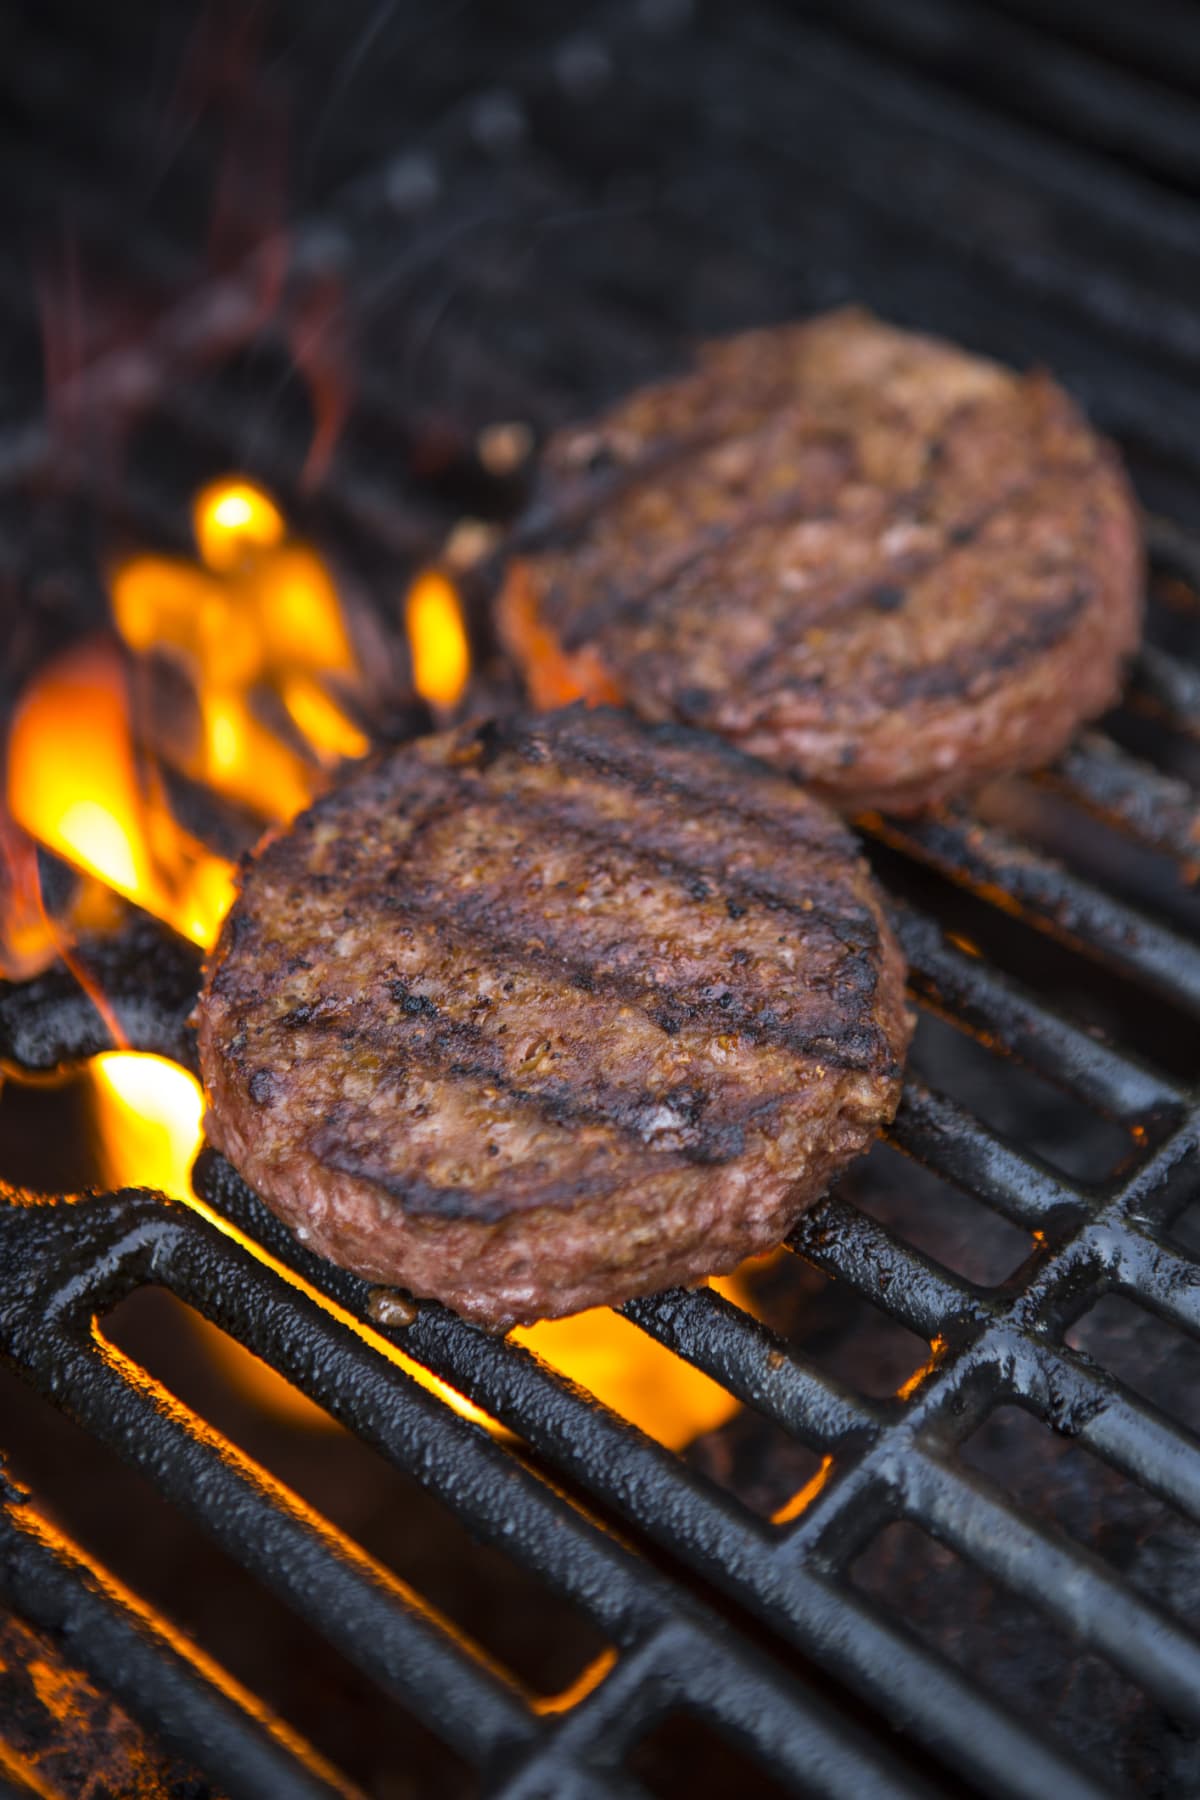 Two patties on grill above fire